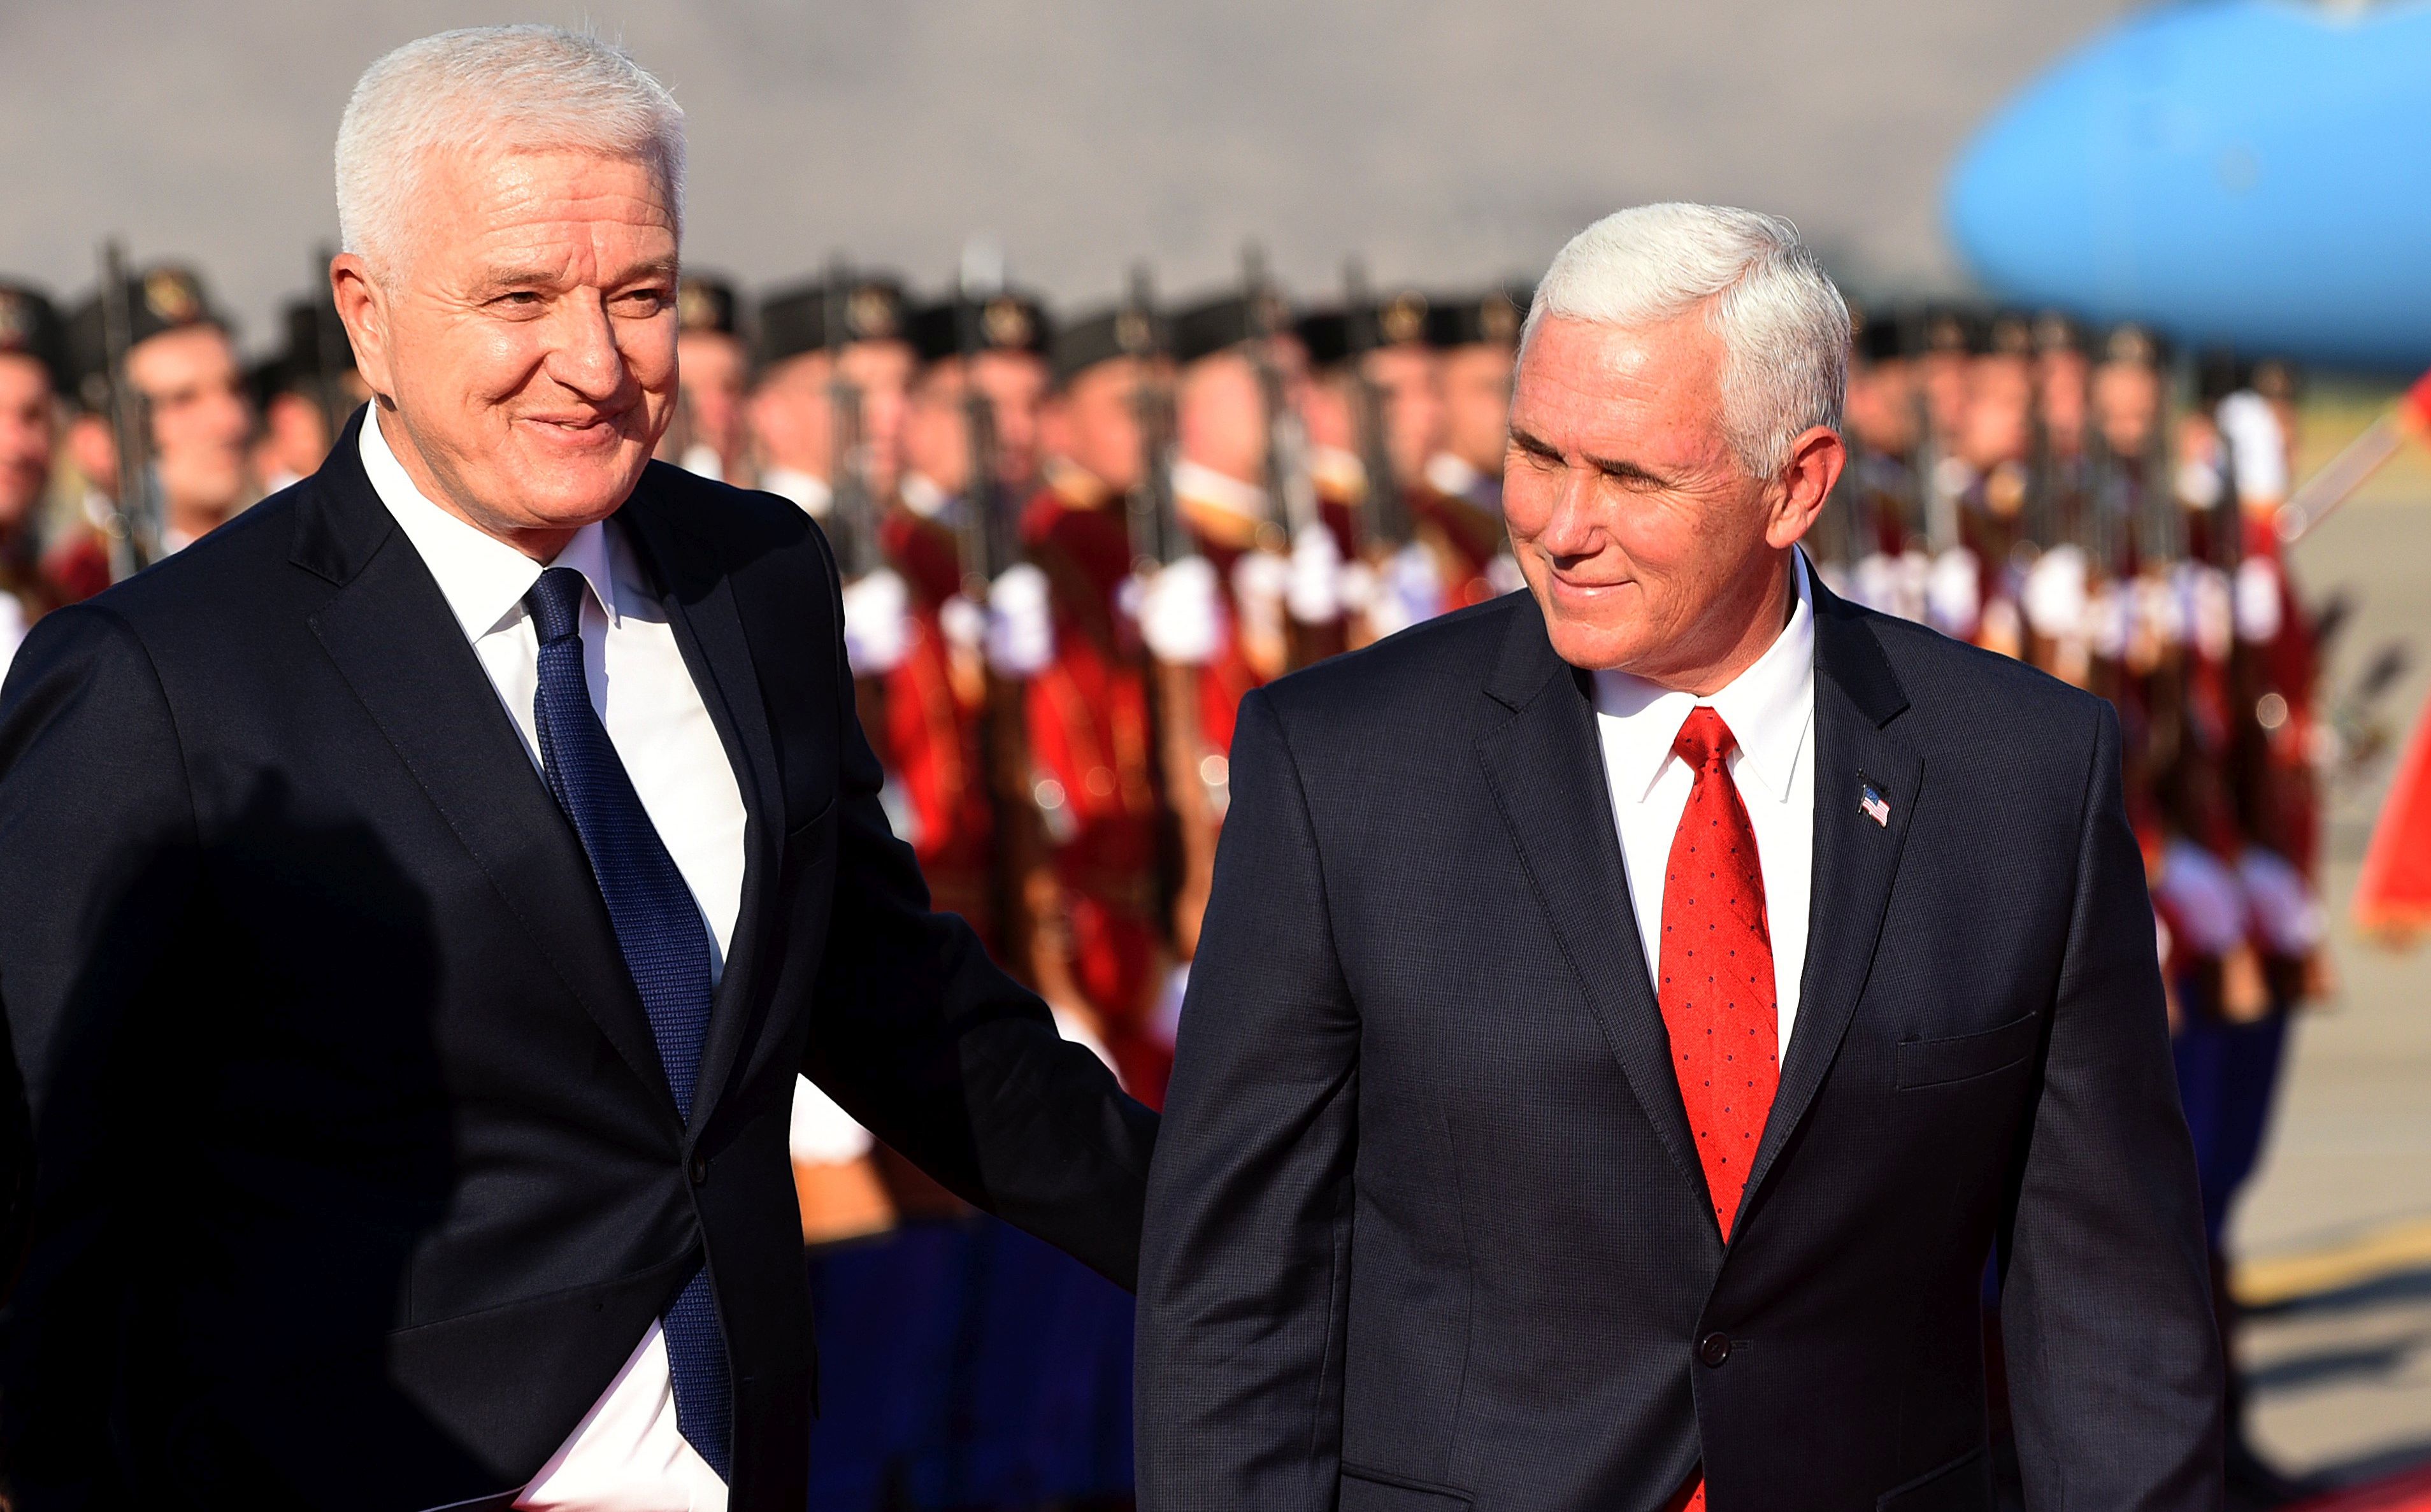 epa06120198 US Vice President Mike Pence (L) and Montenegrian Prime Minister Dusko Markovic (R) attend an official welcome ceremony at the airport Golubovci, Podgorica, Montenegro, 01 August 2017. Pence was in Estonia and Georgia for a visit before continuing to  Montenegro. Pence will attend the  Adriatic Charter Summit, to be hosted by Montenegro and the Republic of Macedonia on 02 August  in Podgorica, Montenegro.  EPA/BORIS PEJOVIC